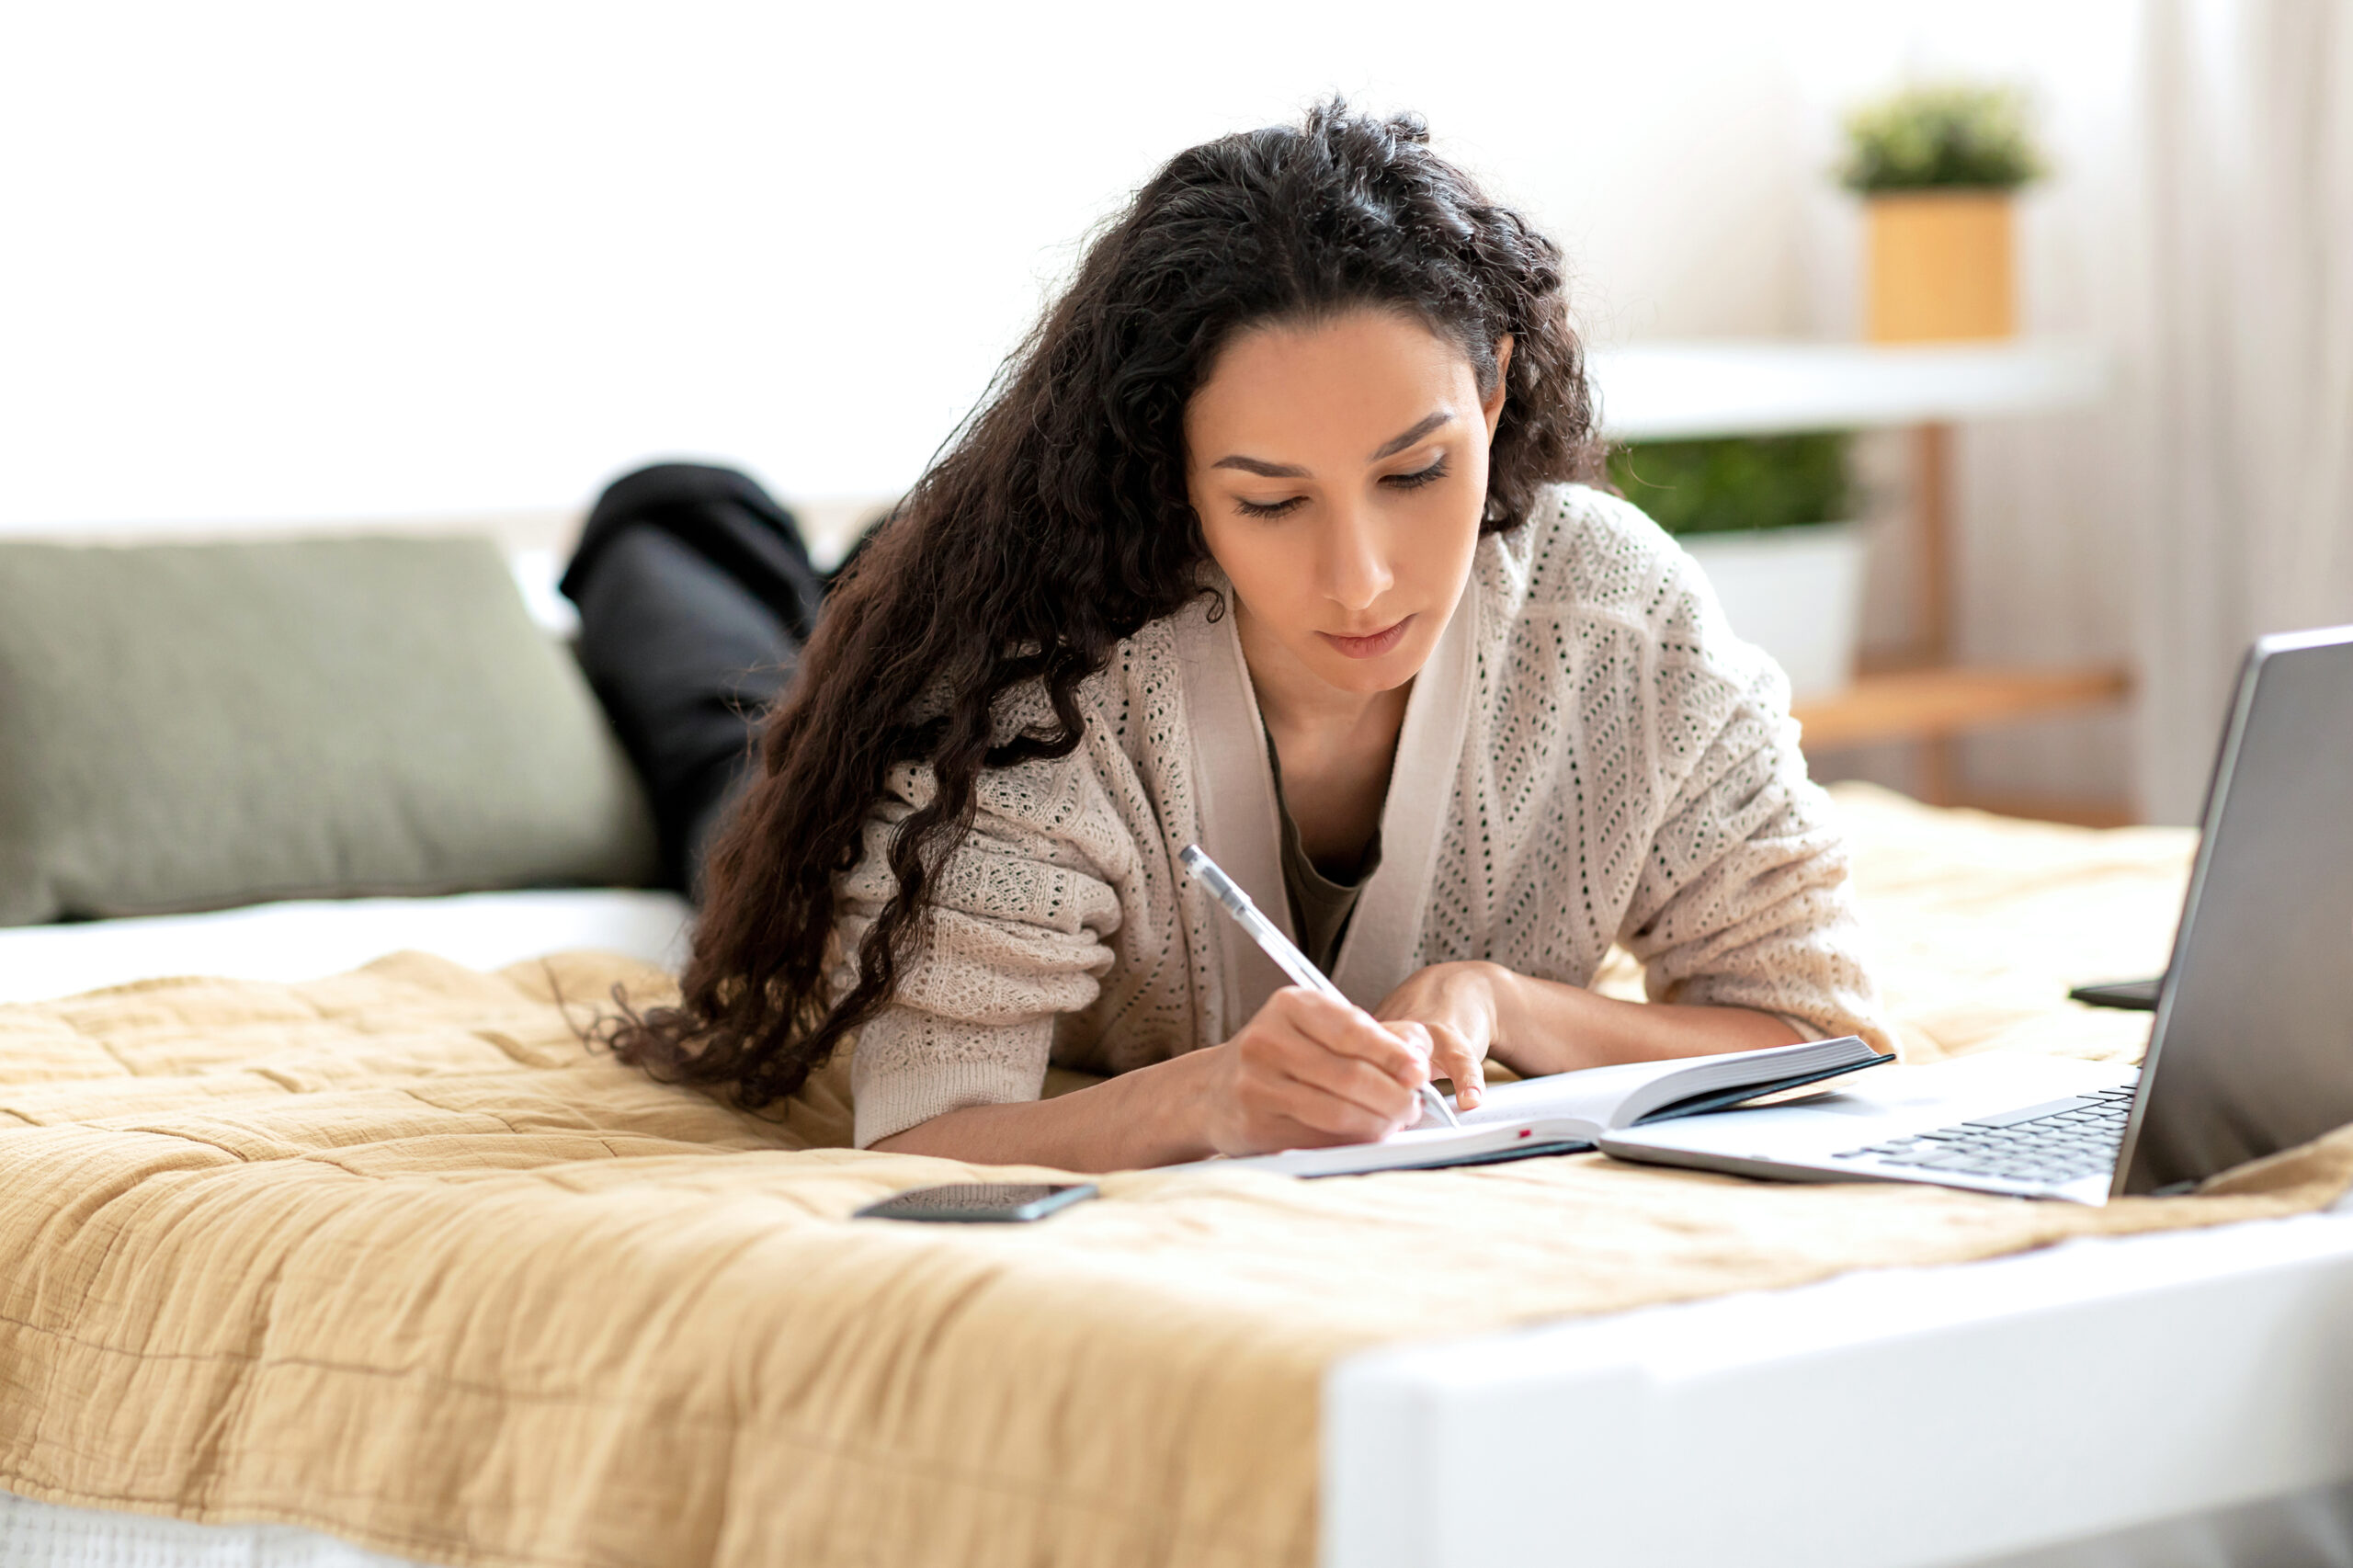 A young woman with long, curly dark hair lies on a bed, using a laptop and writing in a notebook.